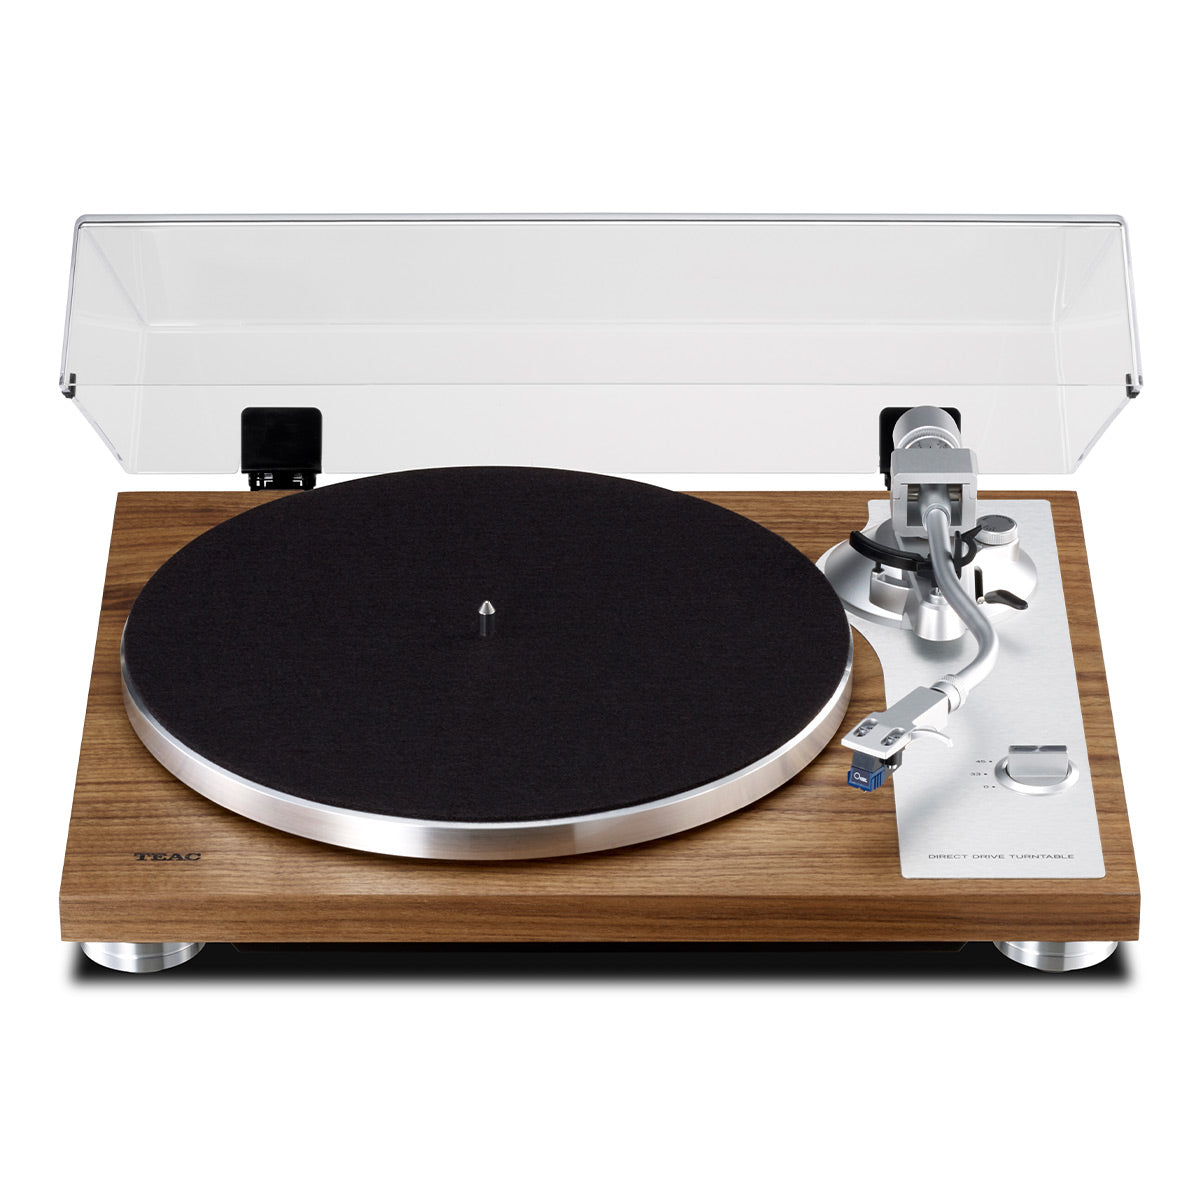 TEAC TN-4D-SE Direct-Drive Turntable with SAEC Tonearm, Built-In Phono Amp, Anti-Skate, and Pre-Installed Sumiko MM Cartridge (Walnut)